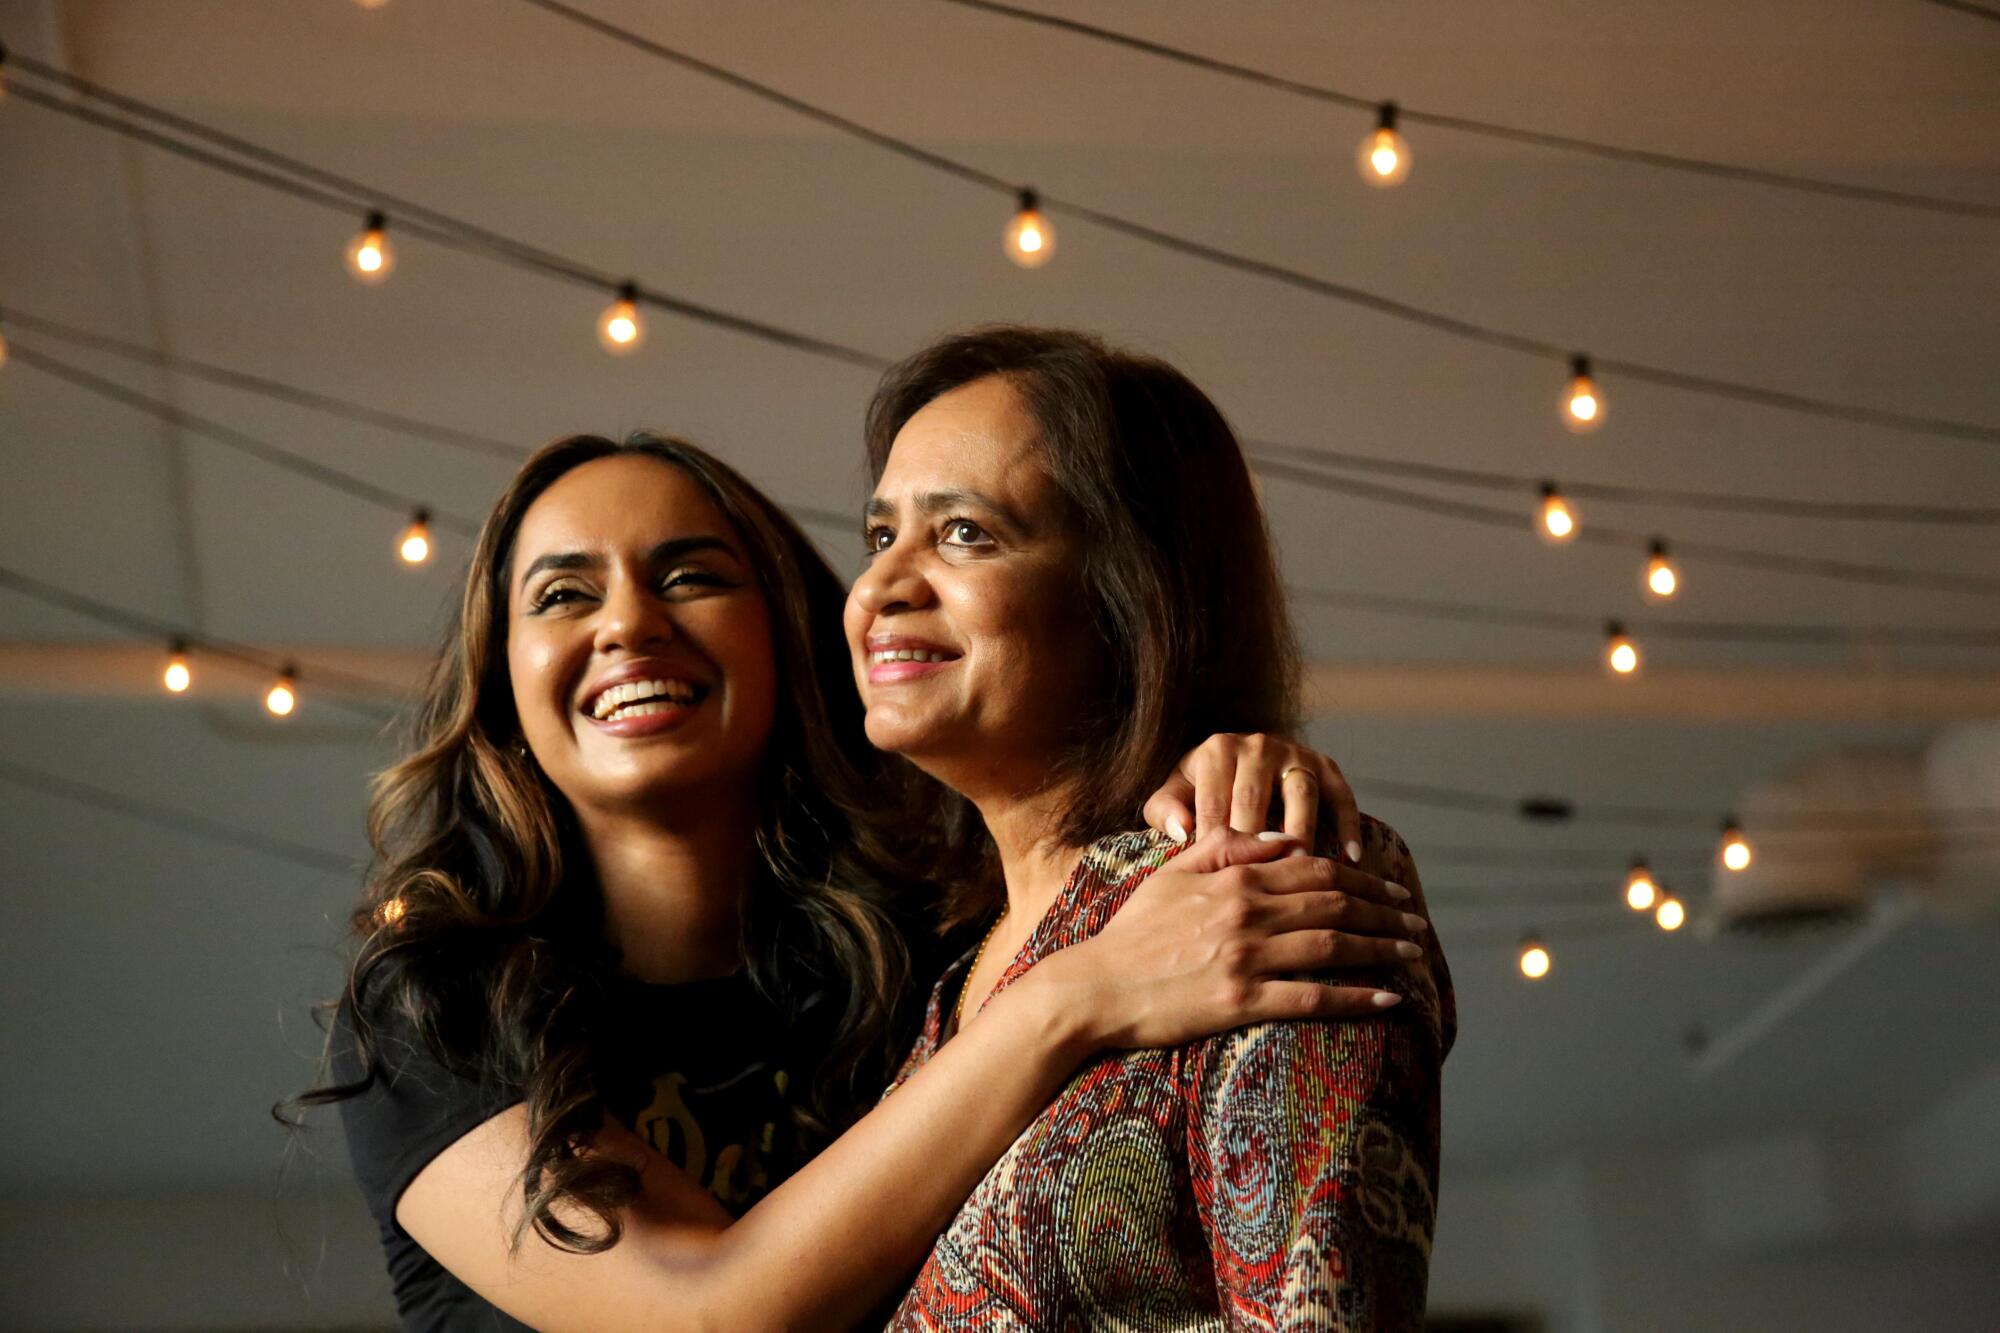 A young woman smiles and embraces her mother